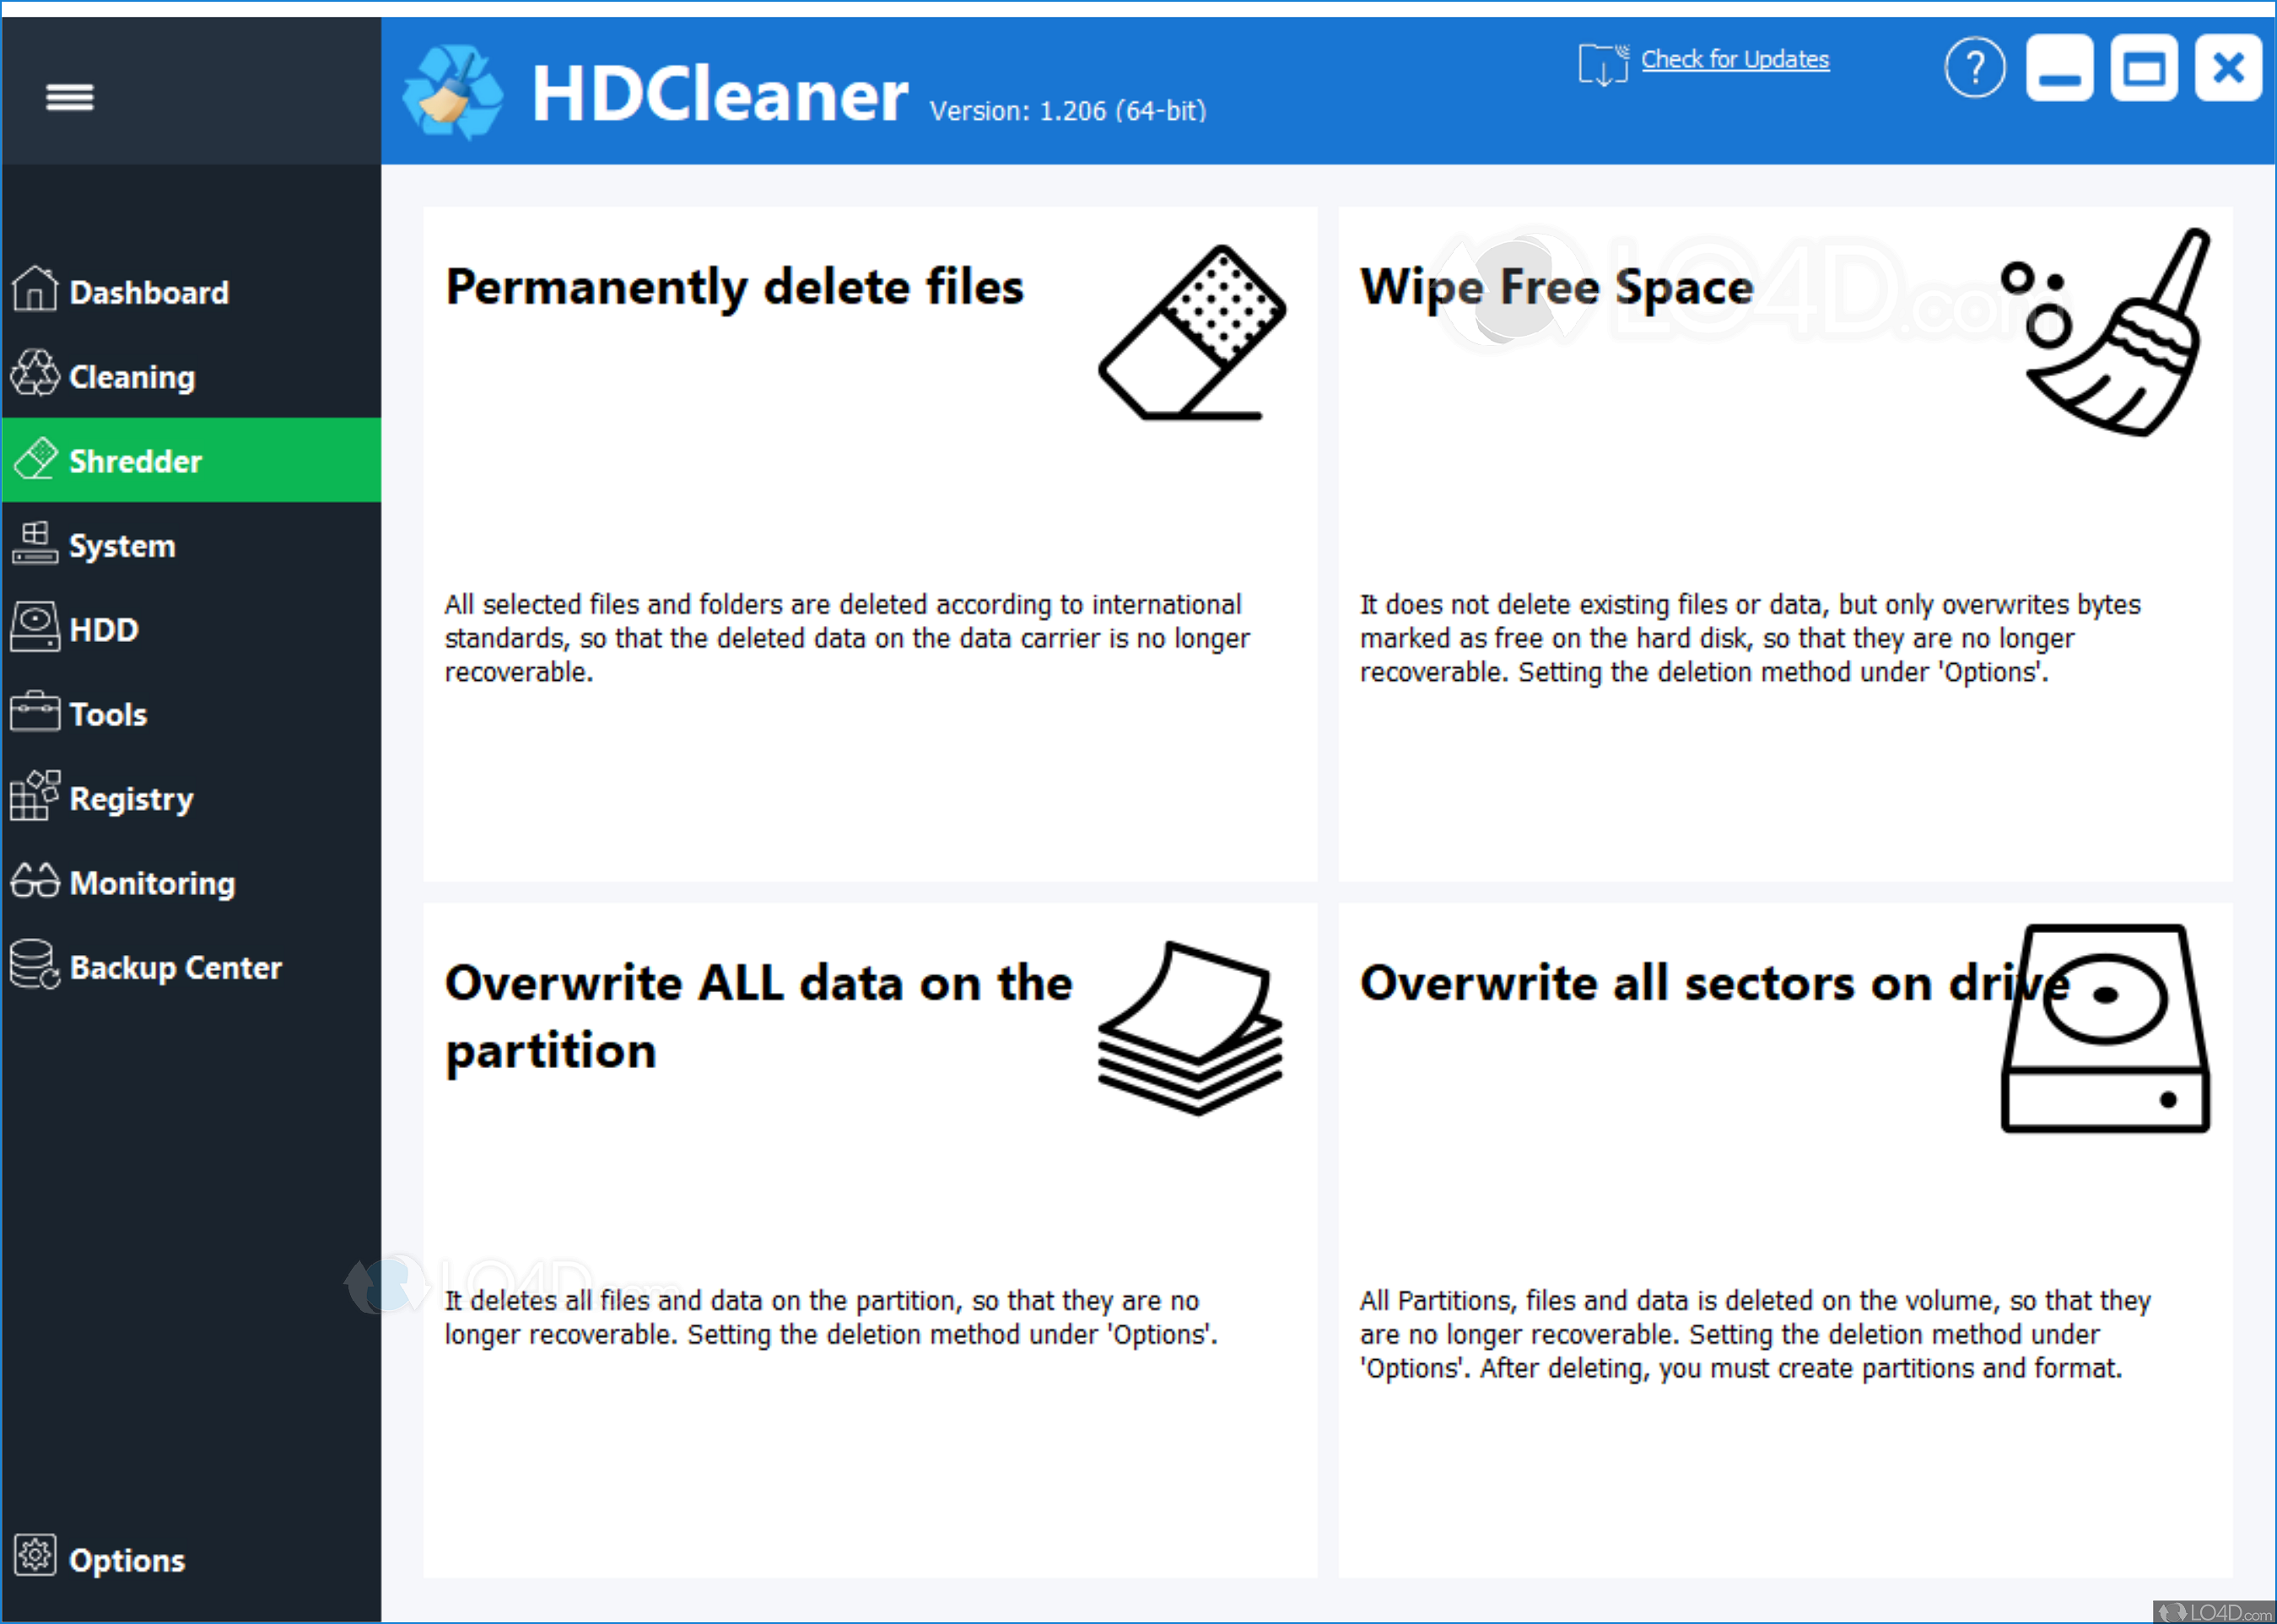 HDCleaner 2.054 download the new